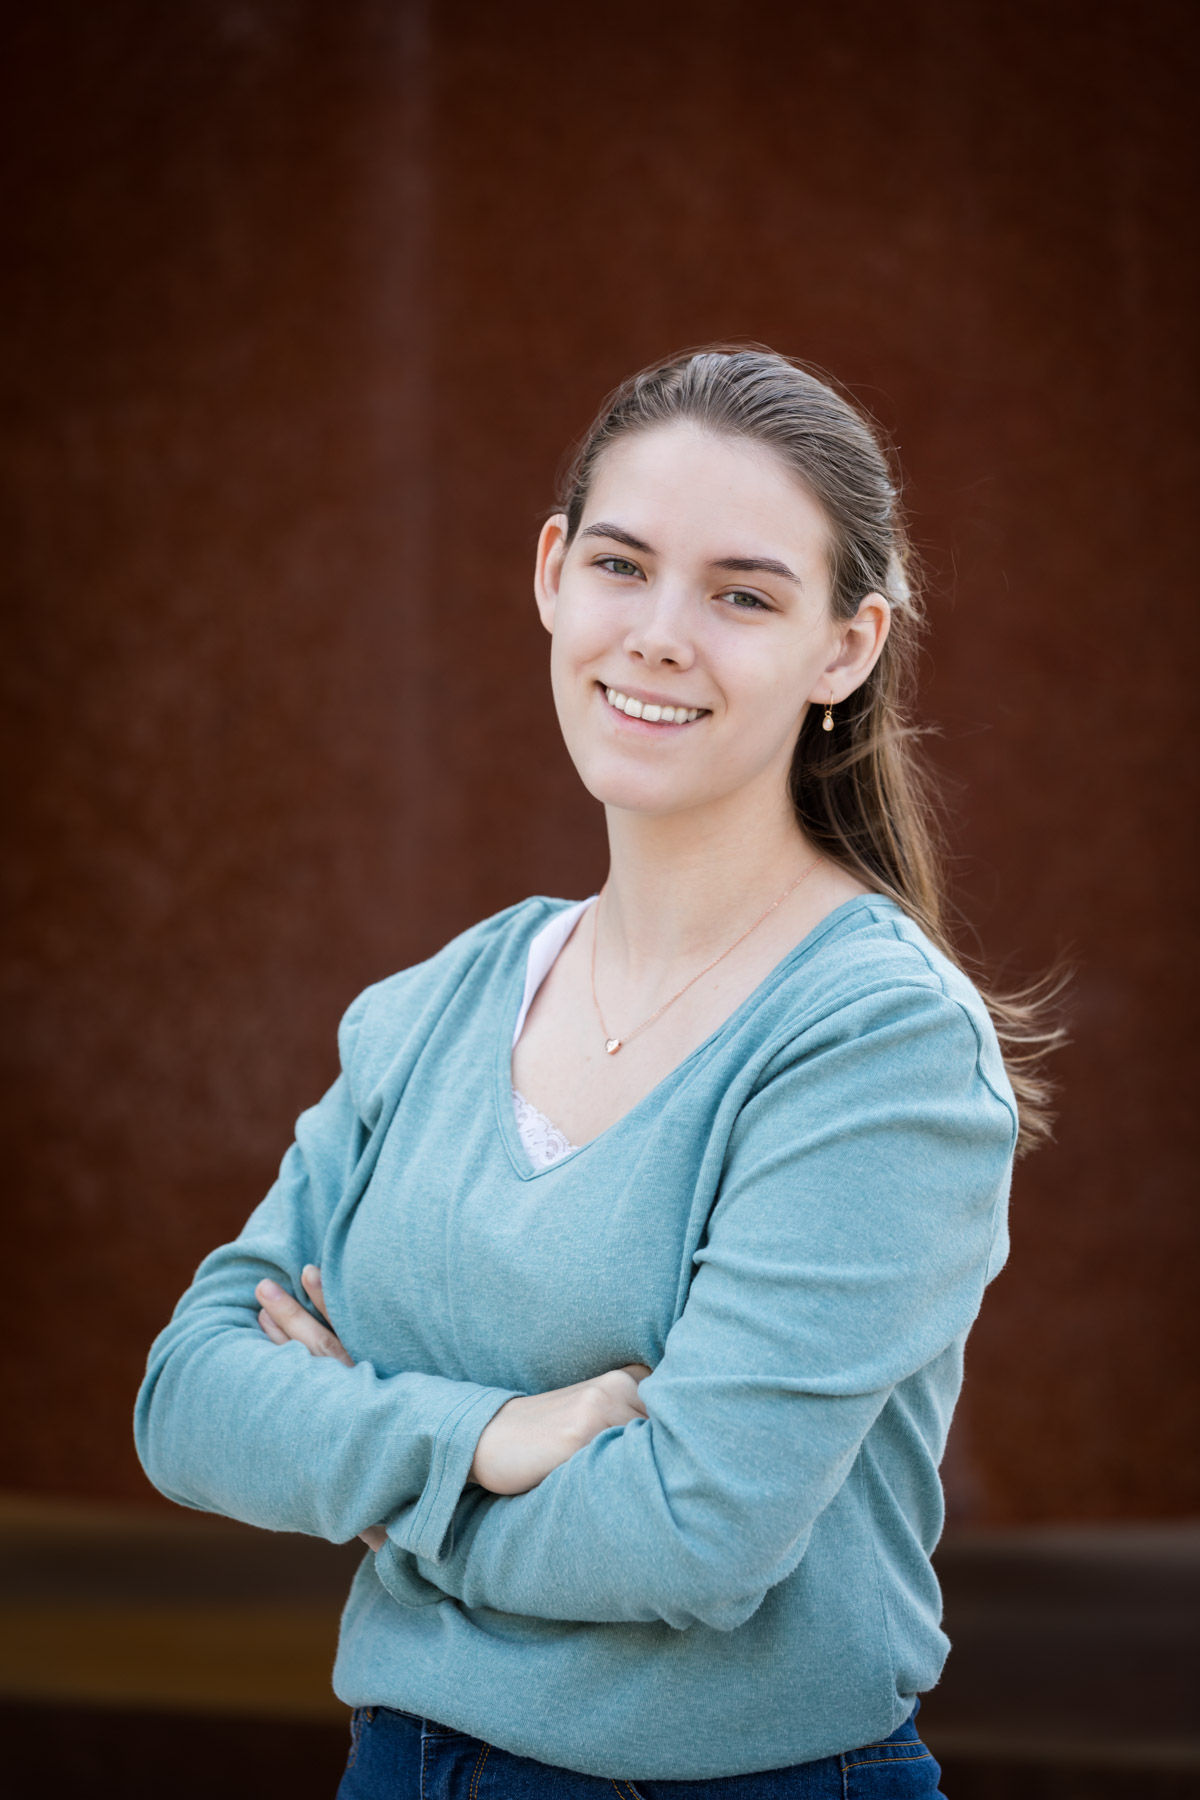 Headshot of woman wearing blue shirt in front of rust-colored background for an article on corporate event photo tips